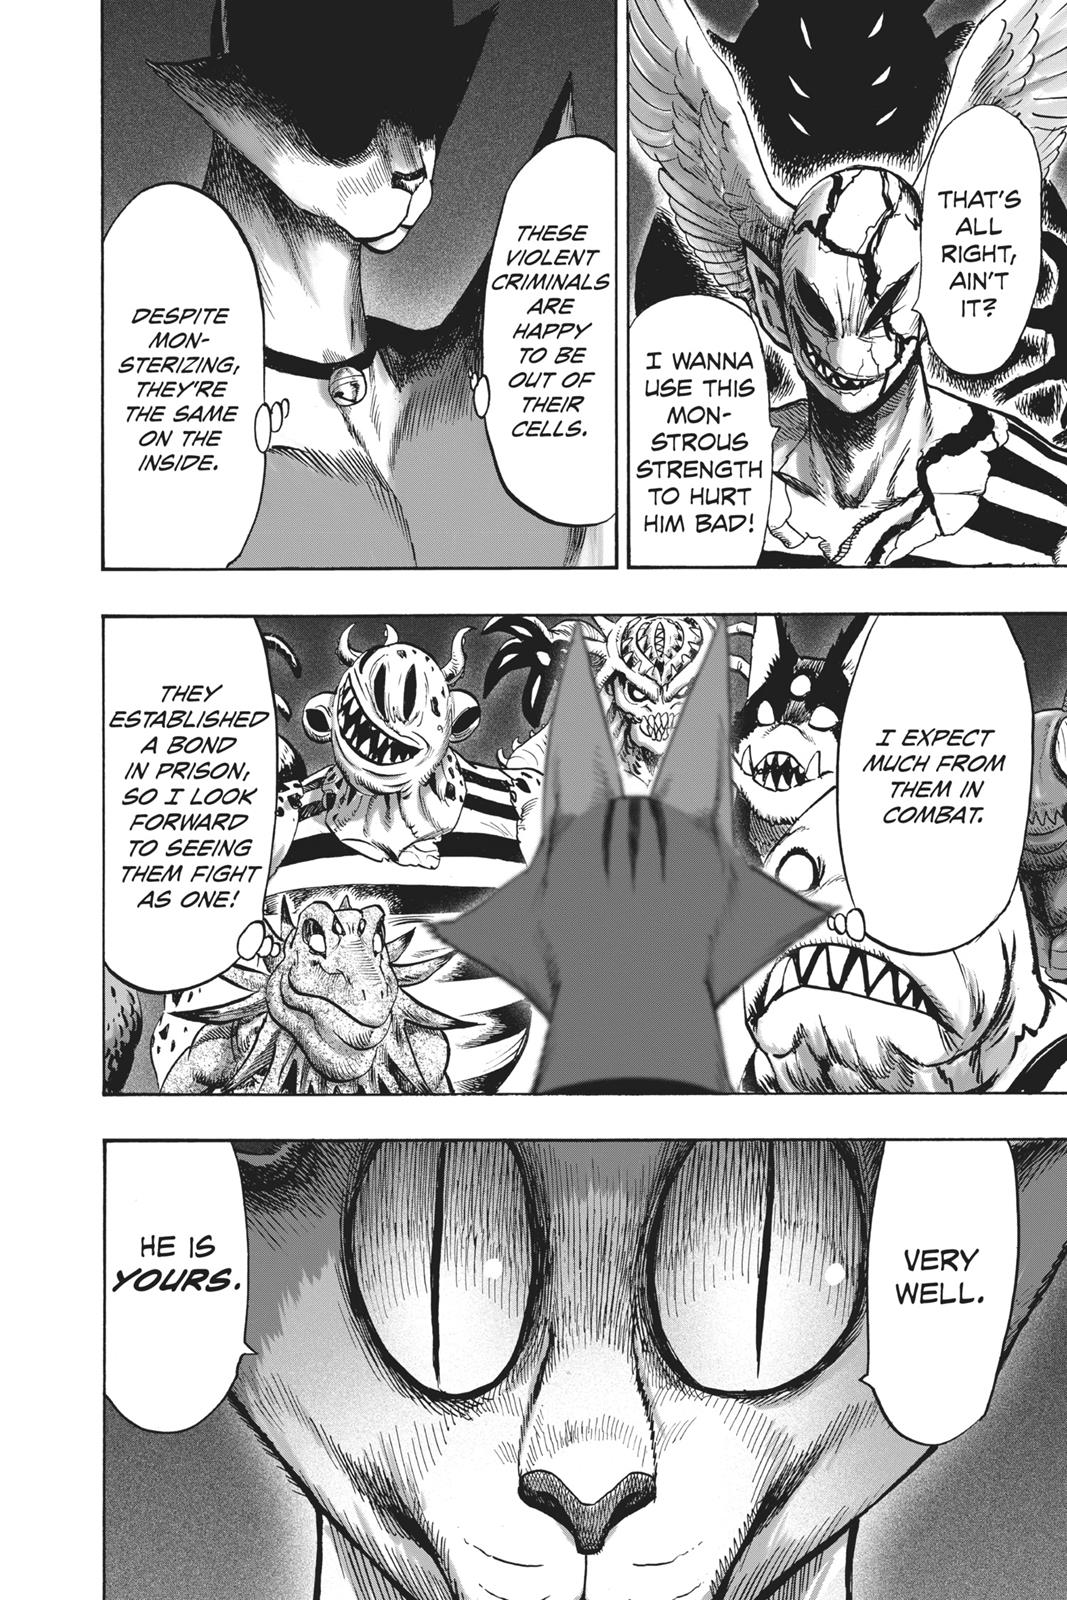 One-Punch Man, Punch 90 image 50